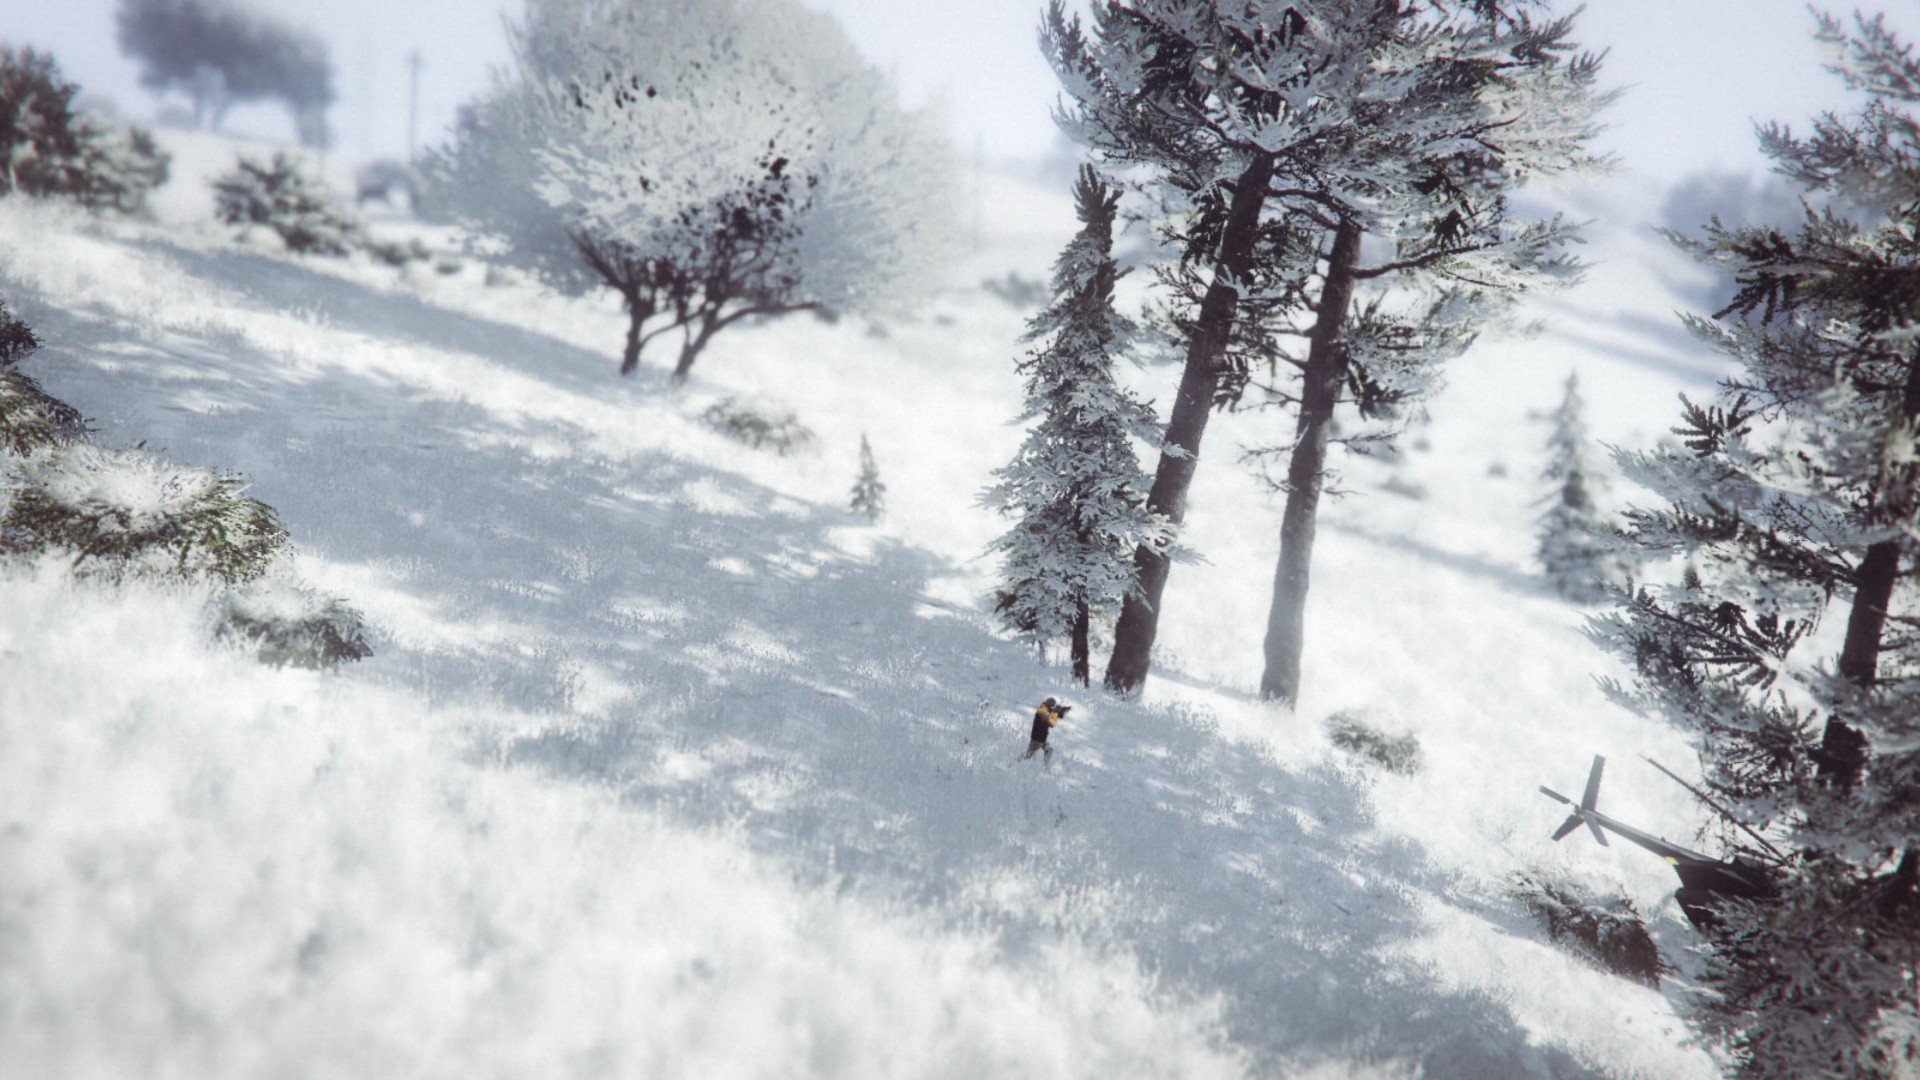 hunter, Grand Theft Auto V, Grand Theft Auto Online, Snow, Wood, Helicopters, Rockstar Games, Shadow Wallpaper